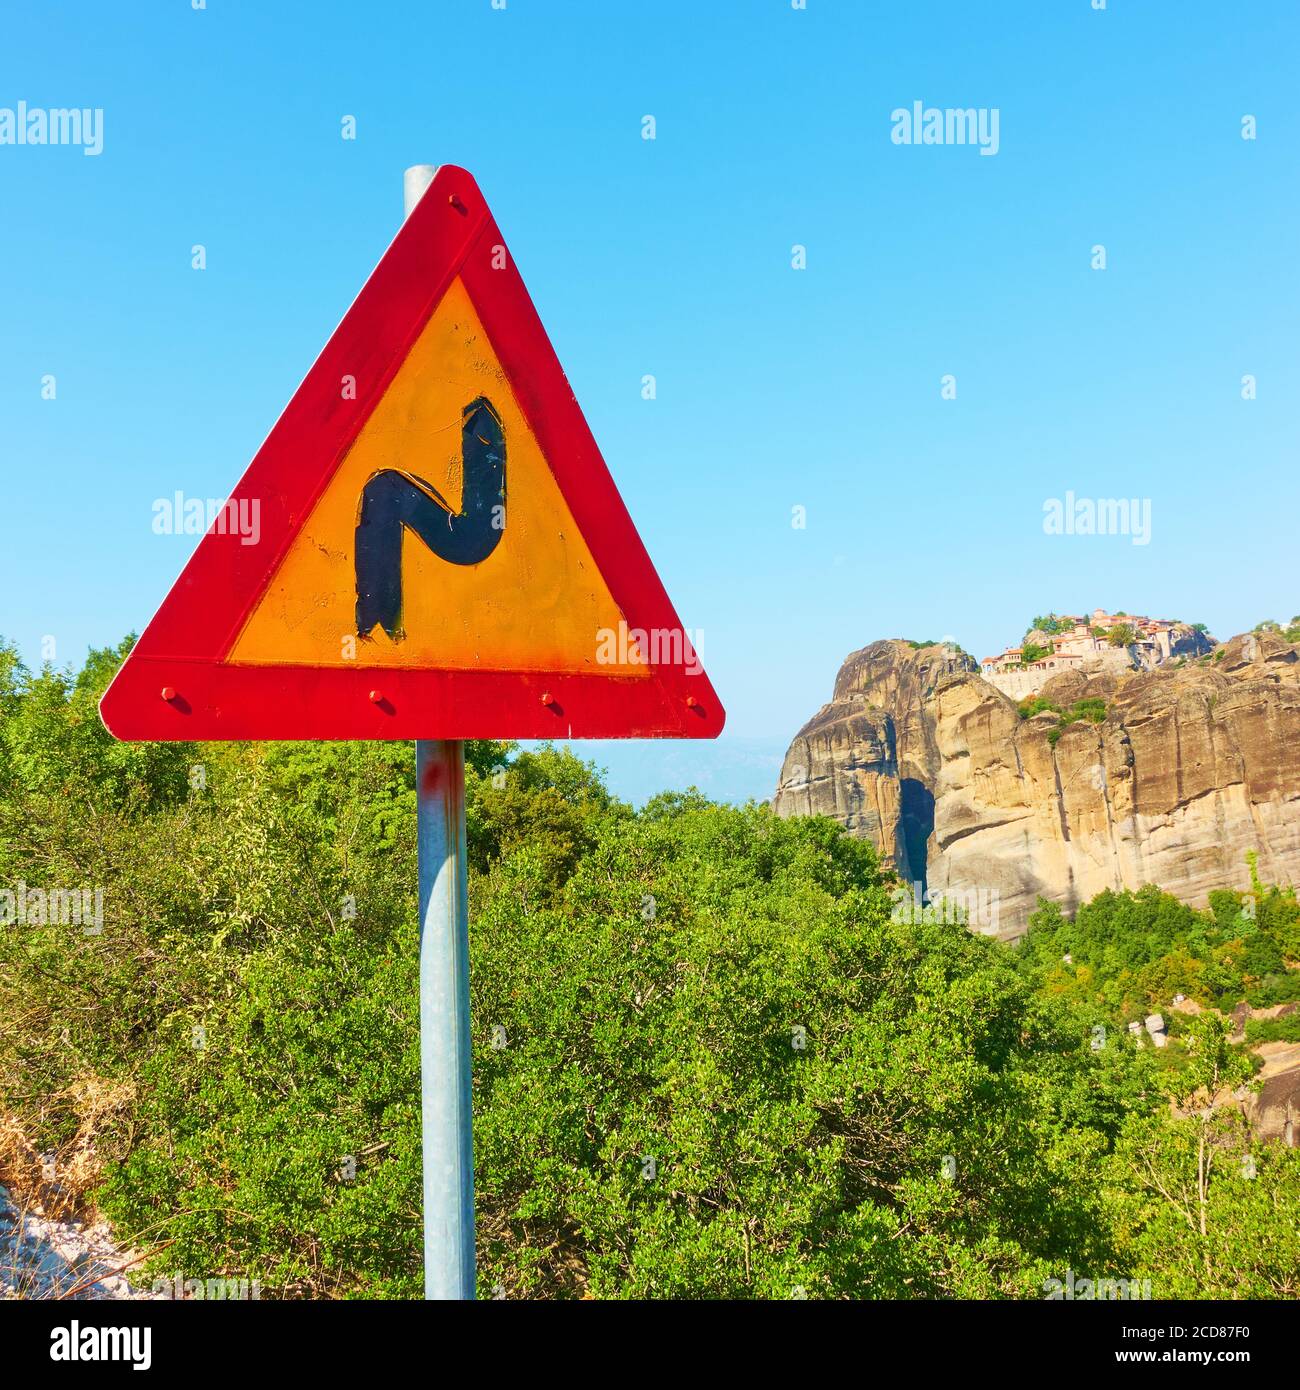 Winding Road sign at mountain spiral highway Stock Photo